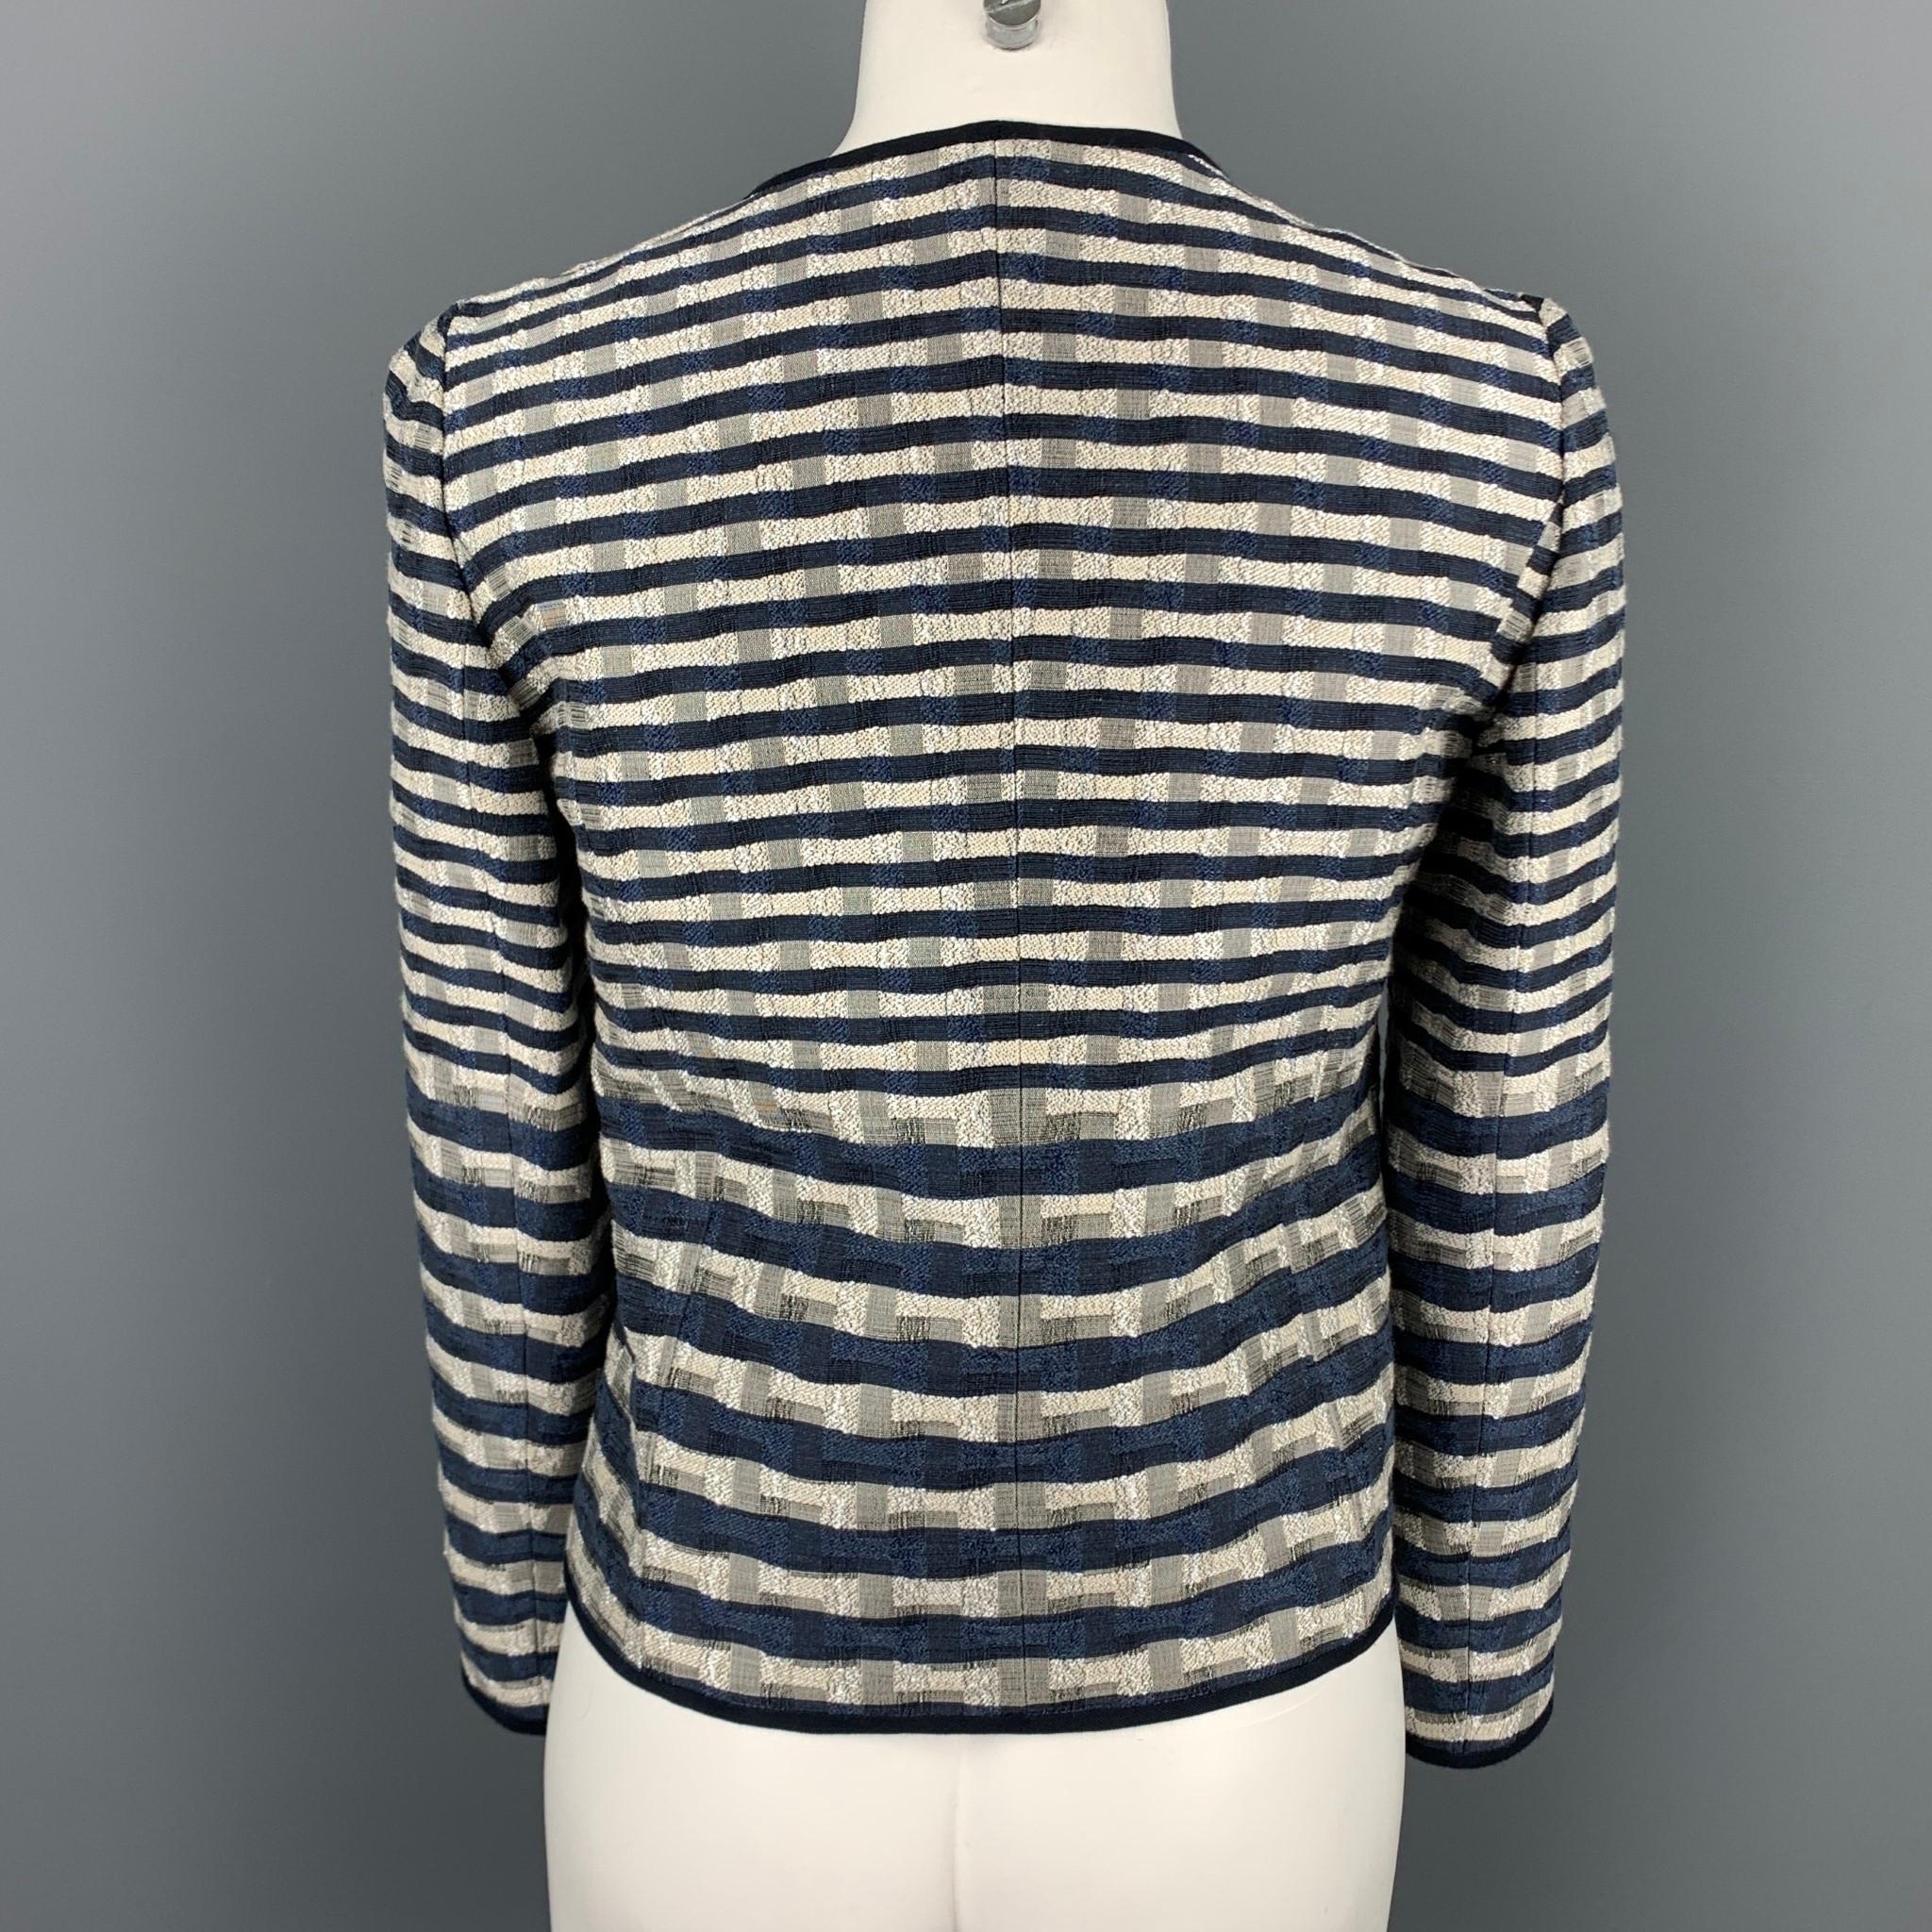 ARMANI COLLEZIONI jacket comes in a navy & white jacquard featuring no collar and a full zip up closure. 

Very Good Pre-Owned Condition.
Marked: 2

Measurements:

Shoulder: 15 in.
Bust: 34 in.
Sleeve: 23 in.
Length: 19.5 in. 